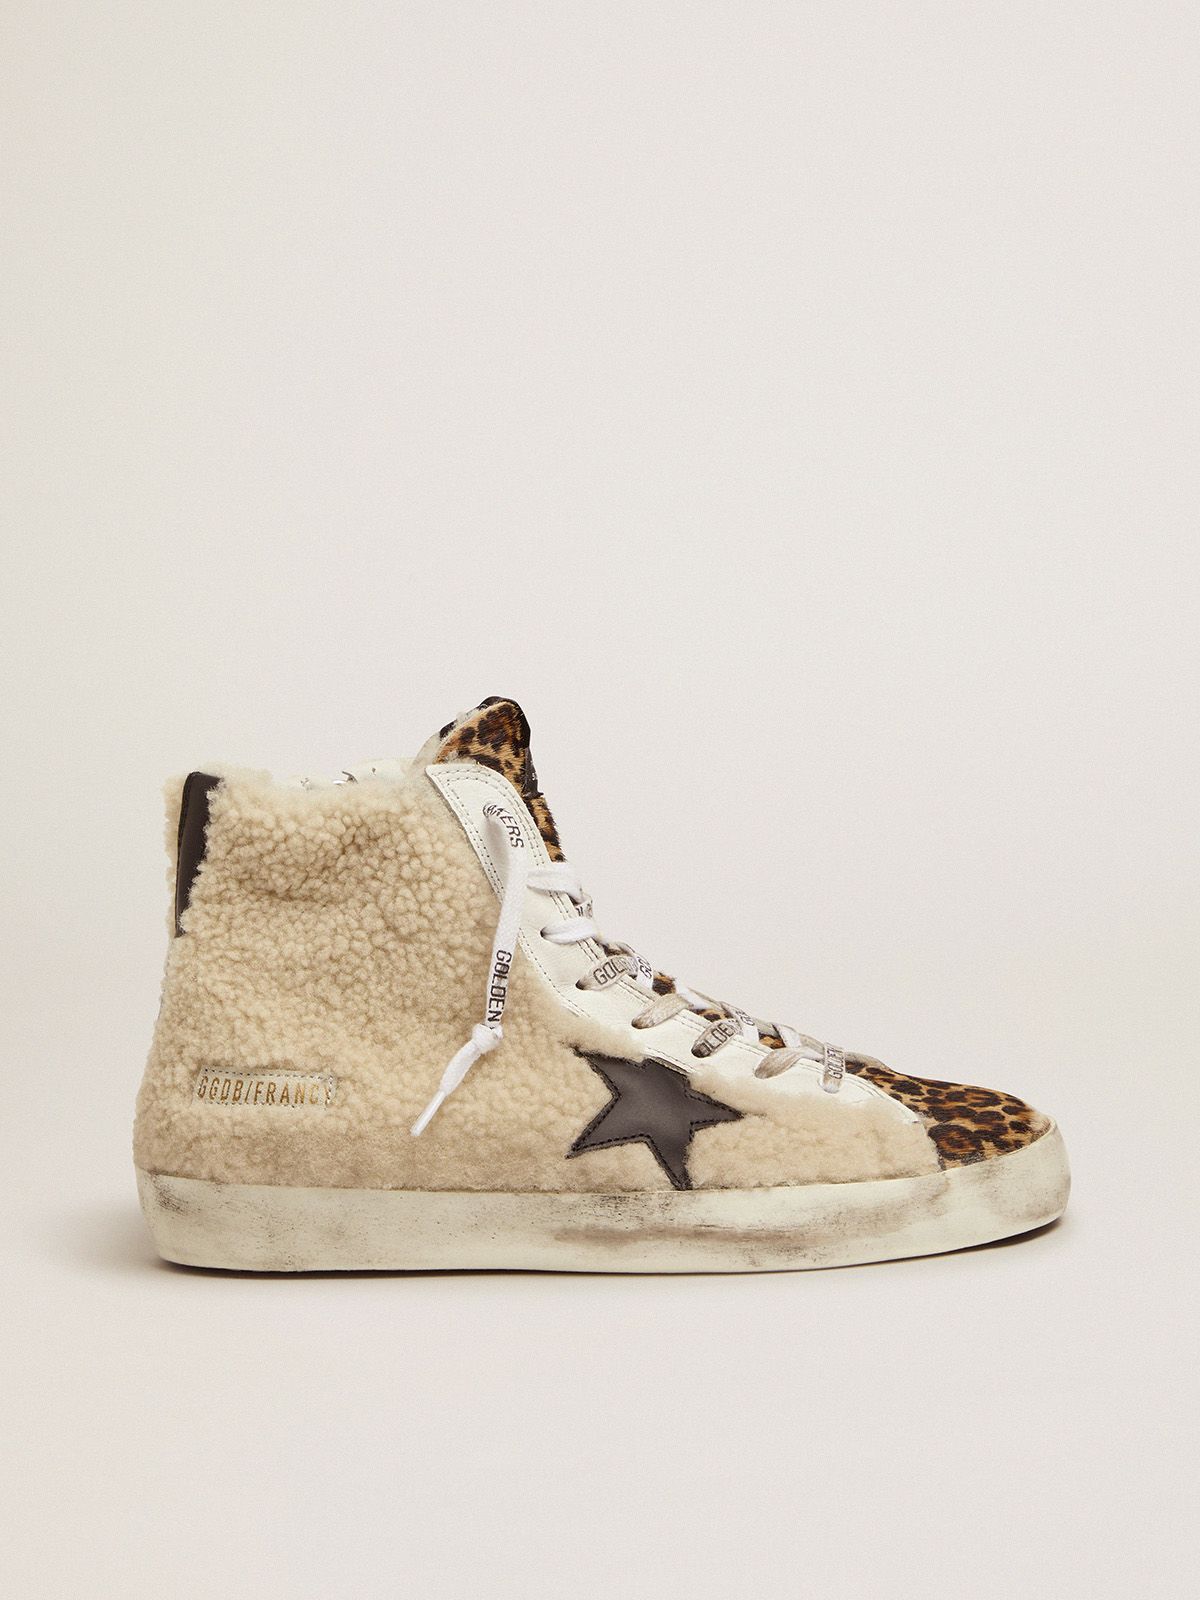 golden goose shearling of skin sneakers made and print leopard Francy pony with a